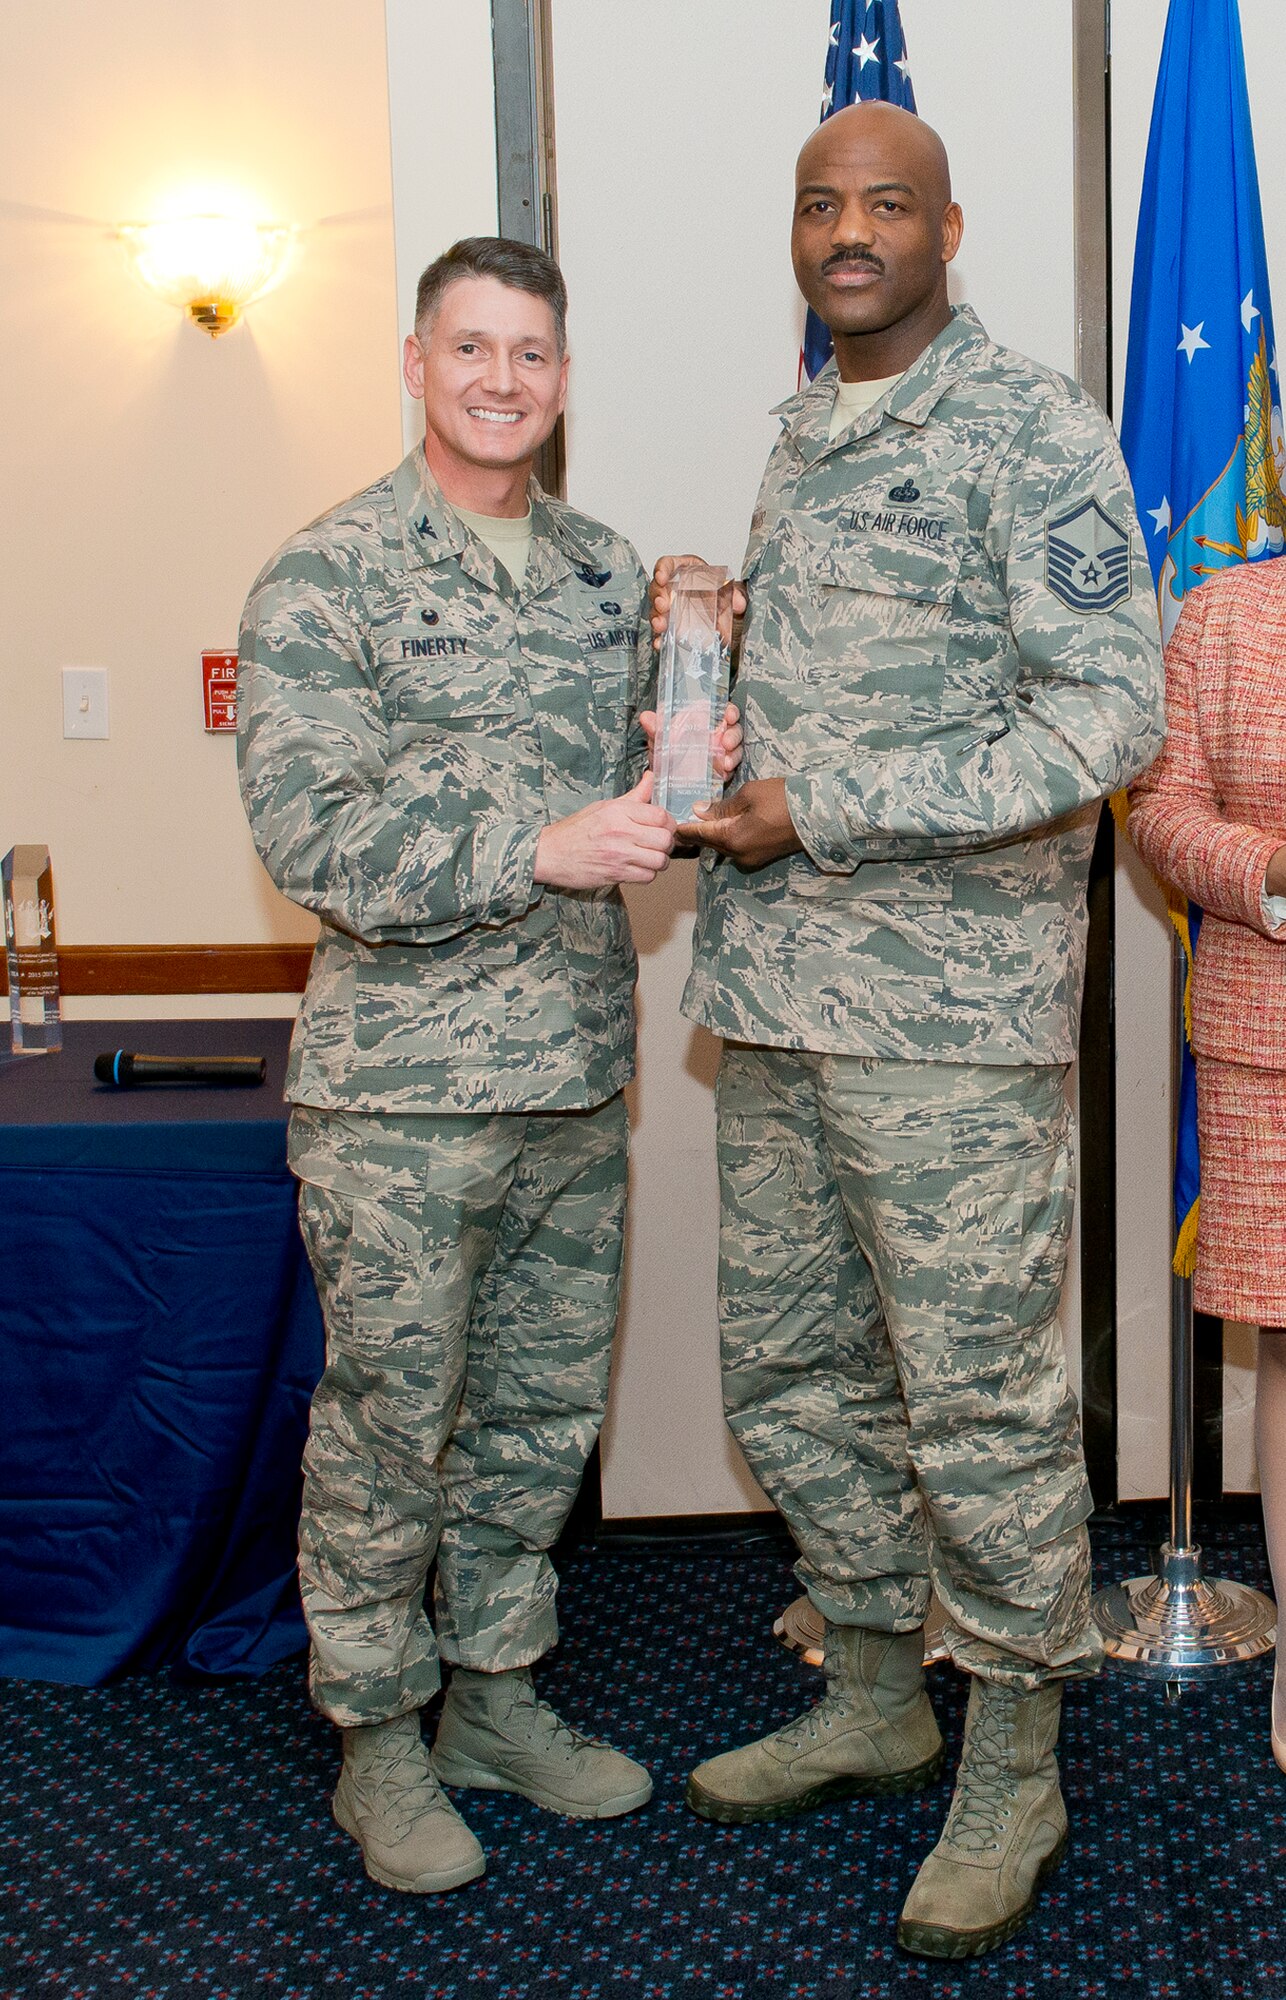 Col. Christopher E. Finerty, the vice commander of the Air National Guard Readiness Center Joint Base Andrews, Md., presents the Senior Non-Commissioned Officer of the Year award to Master Sgt. Donald Edwards during the 2015 ANGRC annual awards ceremony, April 18, 2016. The ceremony recognizes significant contributions in leadership, job performance in their primary duties, self-improvement, and base and community involvement. (Air National Guard photo by Master Sgt. Marvin R. Preston/Released)